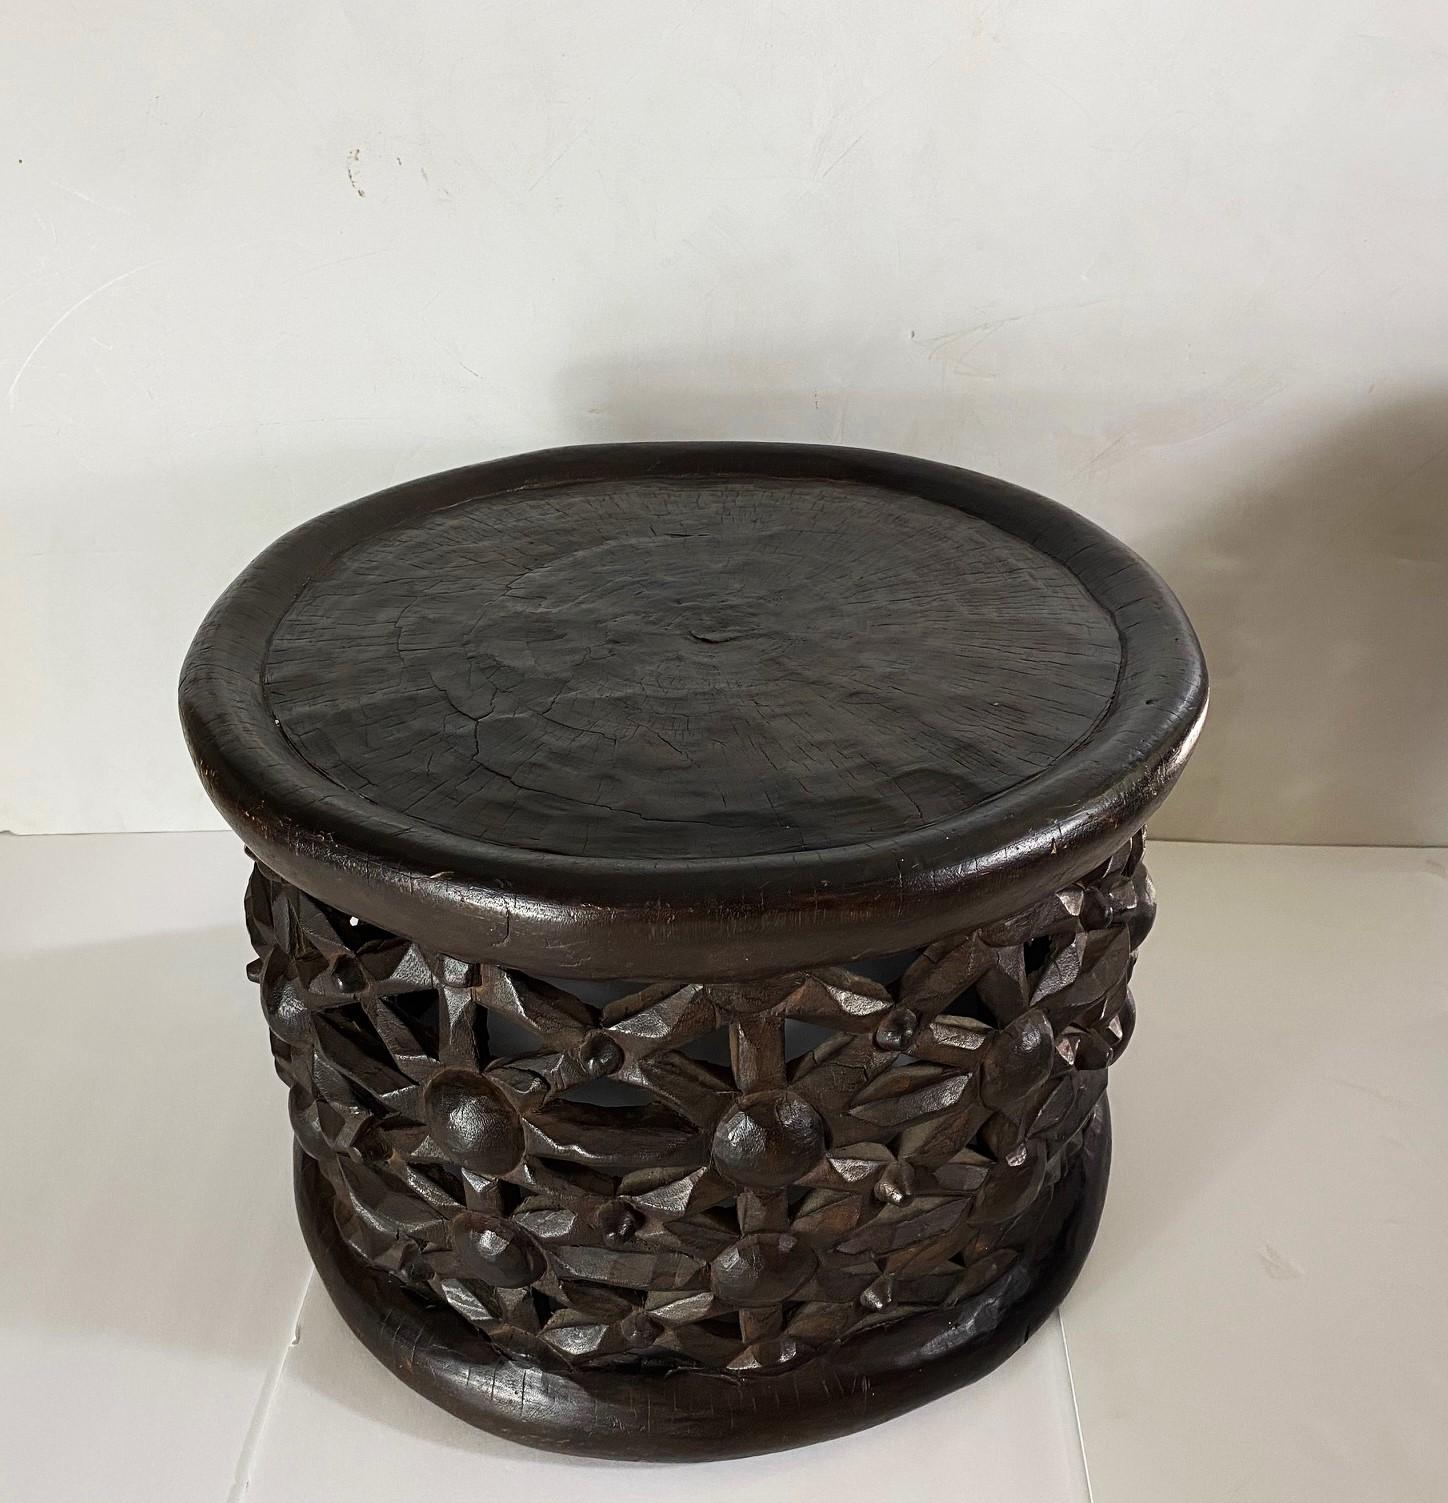 Authentic Bamileke Stool from Cameroon. Beautiful 20th-century (c. 1960) carving with a large diameter and unique design can be used as a coffee table or side table.
Hand-carved from one continuous piece of wood. A unique design and a true work of